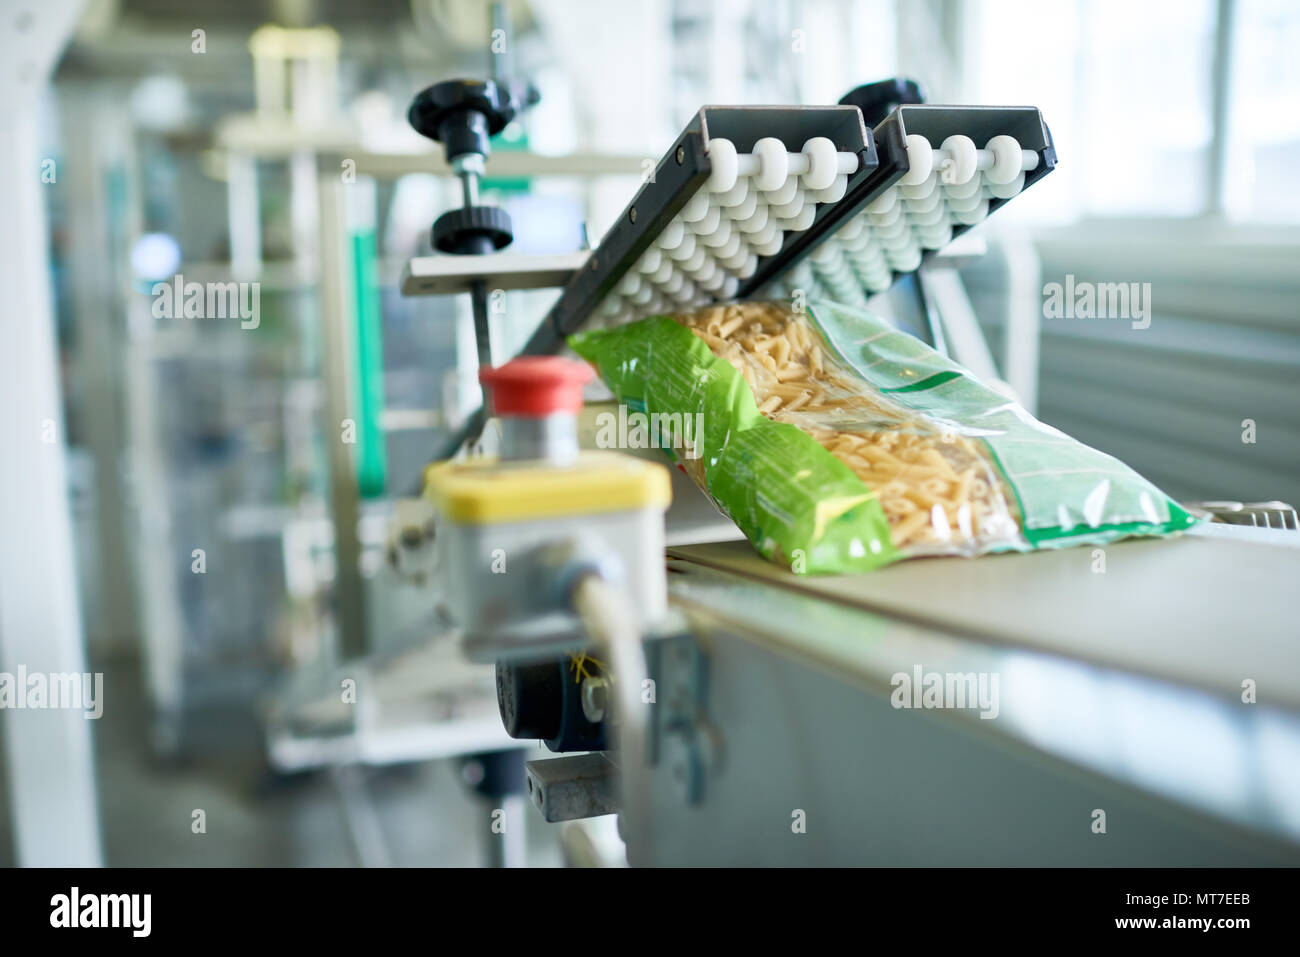 Packaging Line at Food Factory Stock Photo